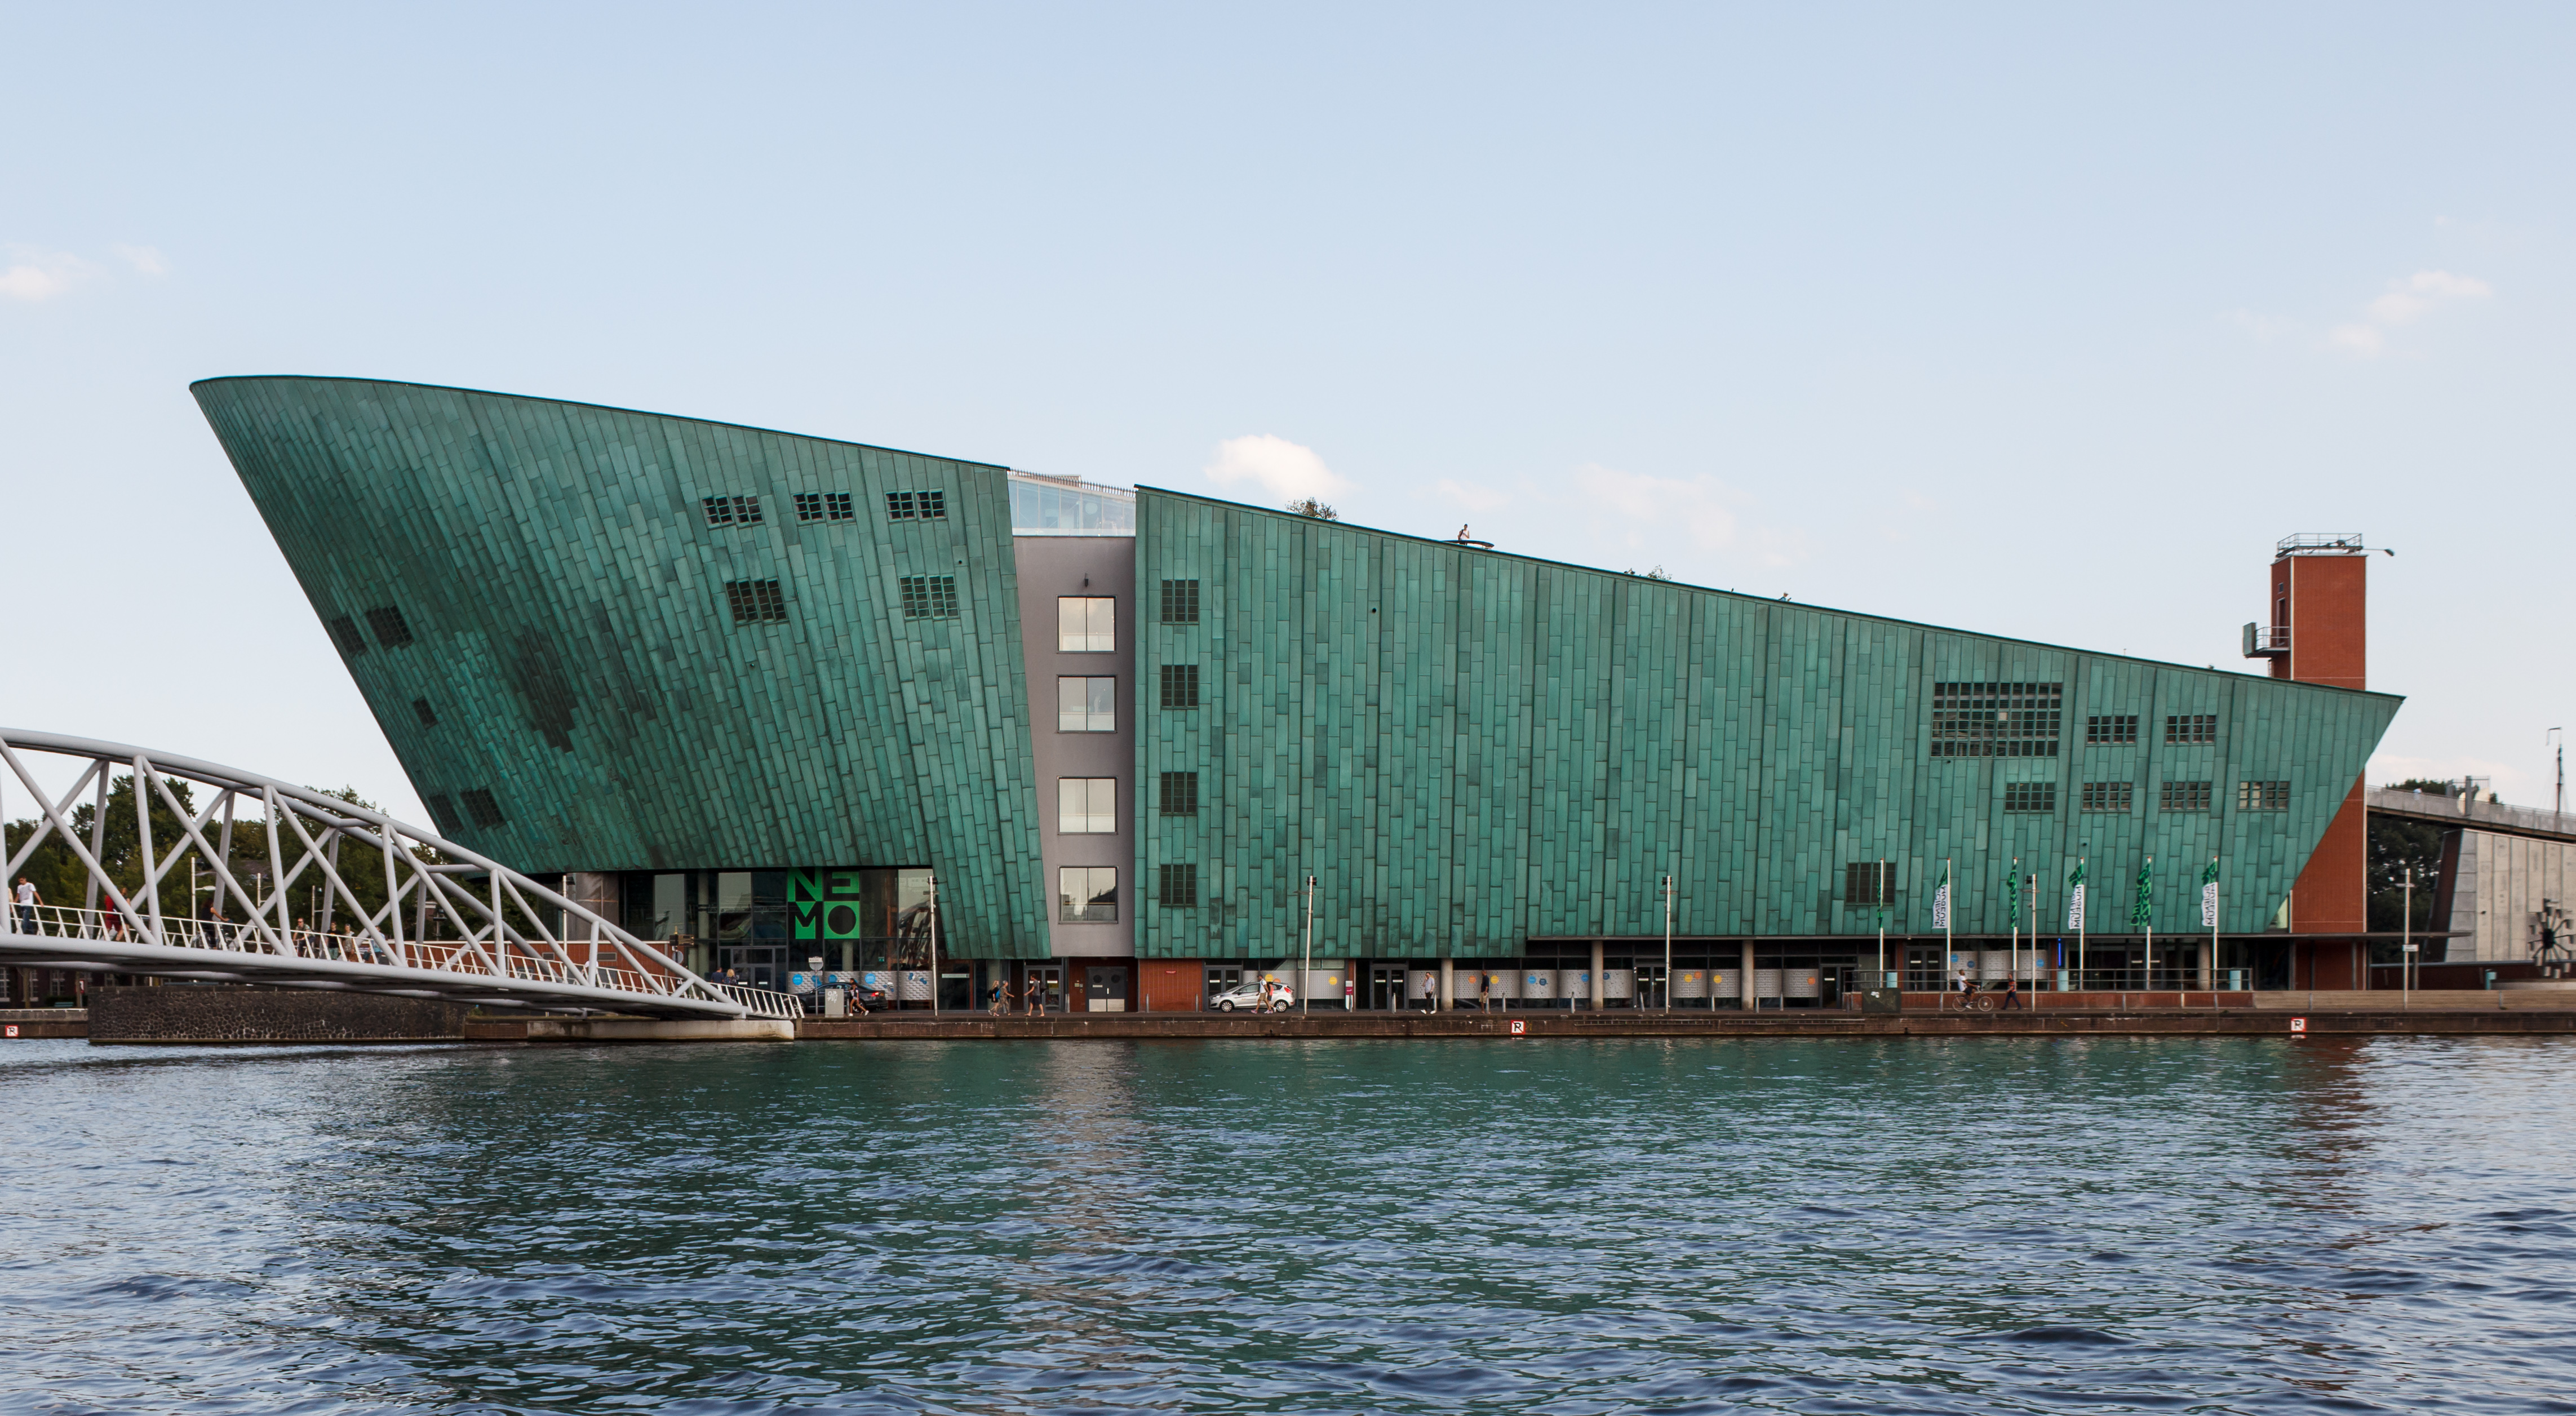 NEMO science center from tour boat 2016-09-12-6565